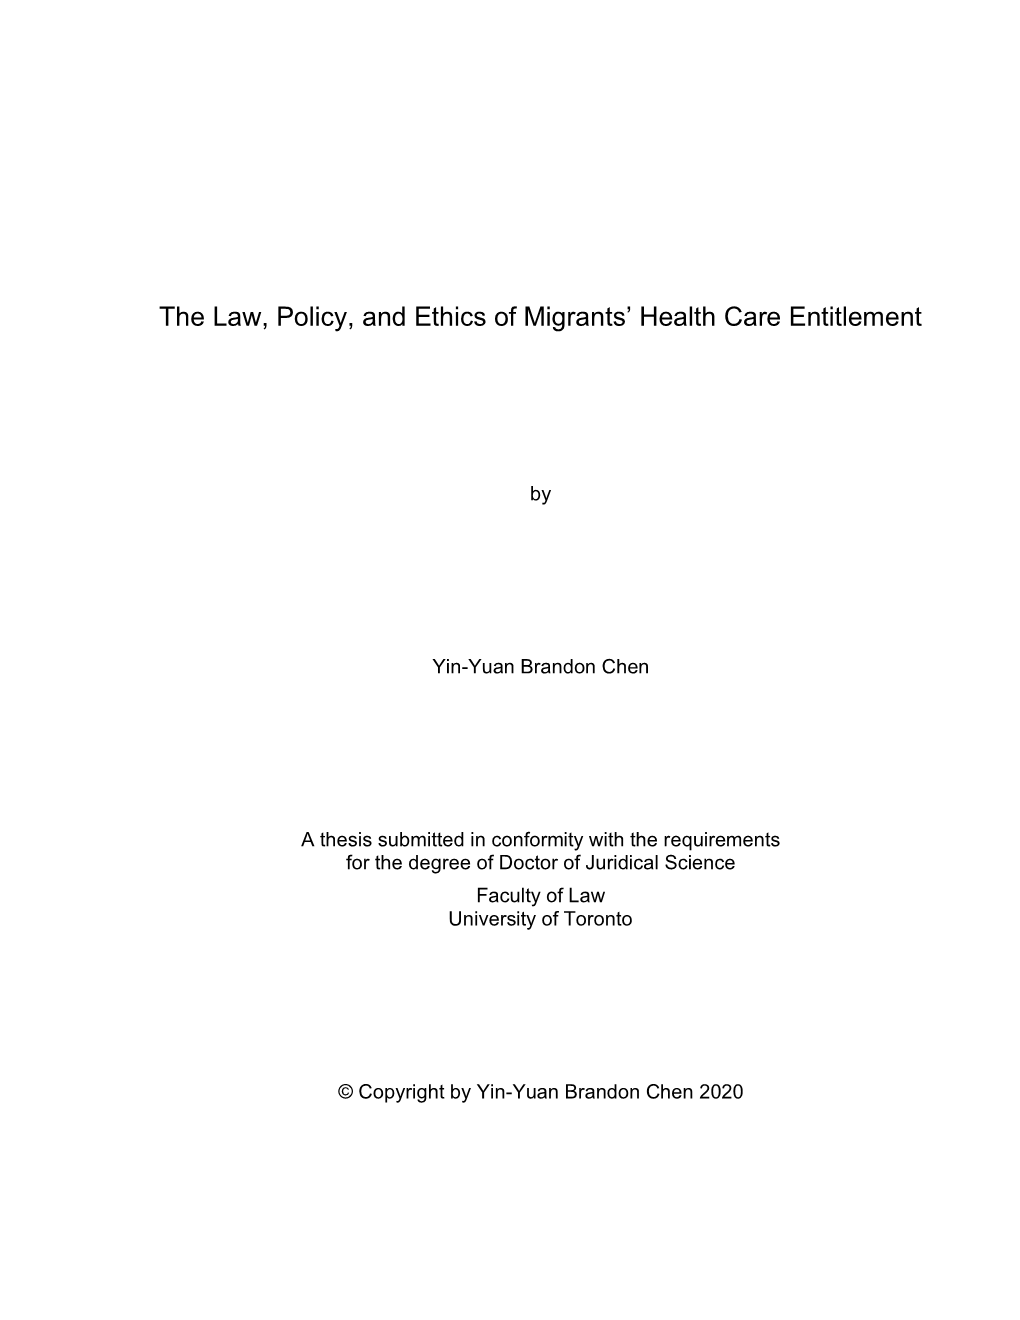 The Law, Policy, and Ethics of Migrants' Health Care Entitlement